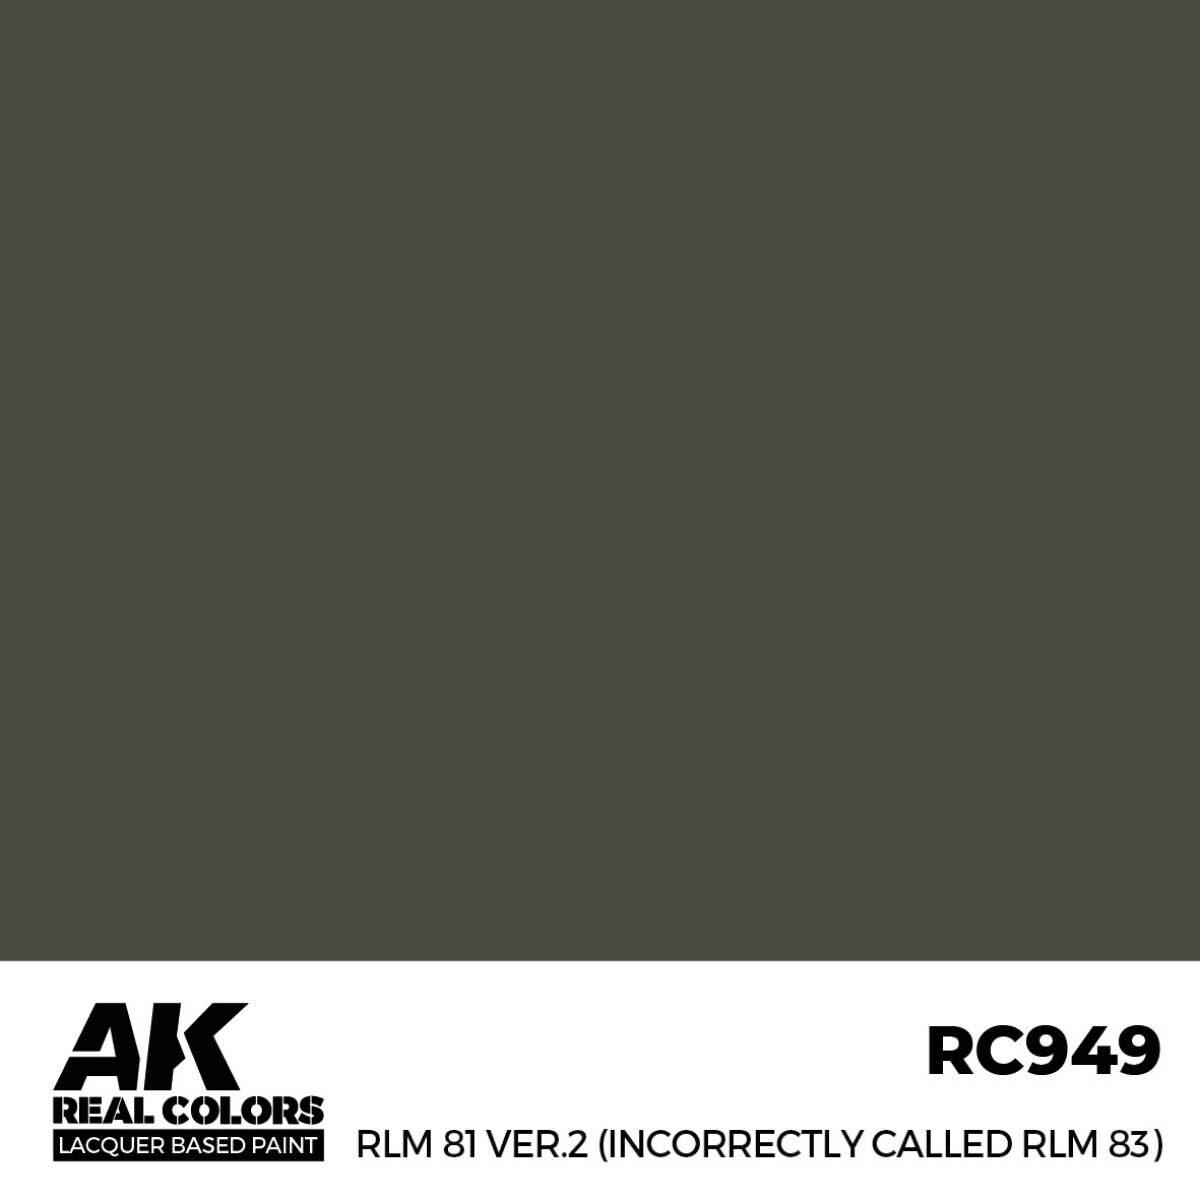 AK RC949 Real Colors RLM 81 Ver.2 (incorrectly called RLM 83) 17 ml.